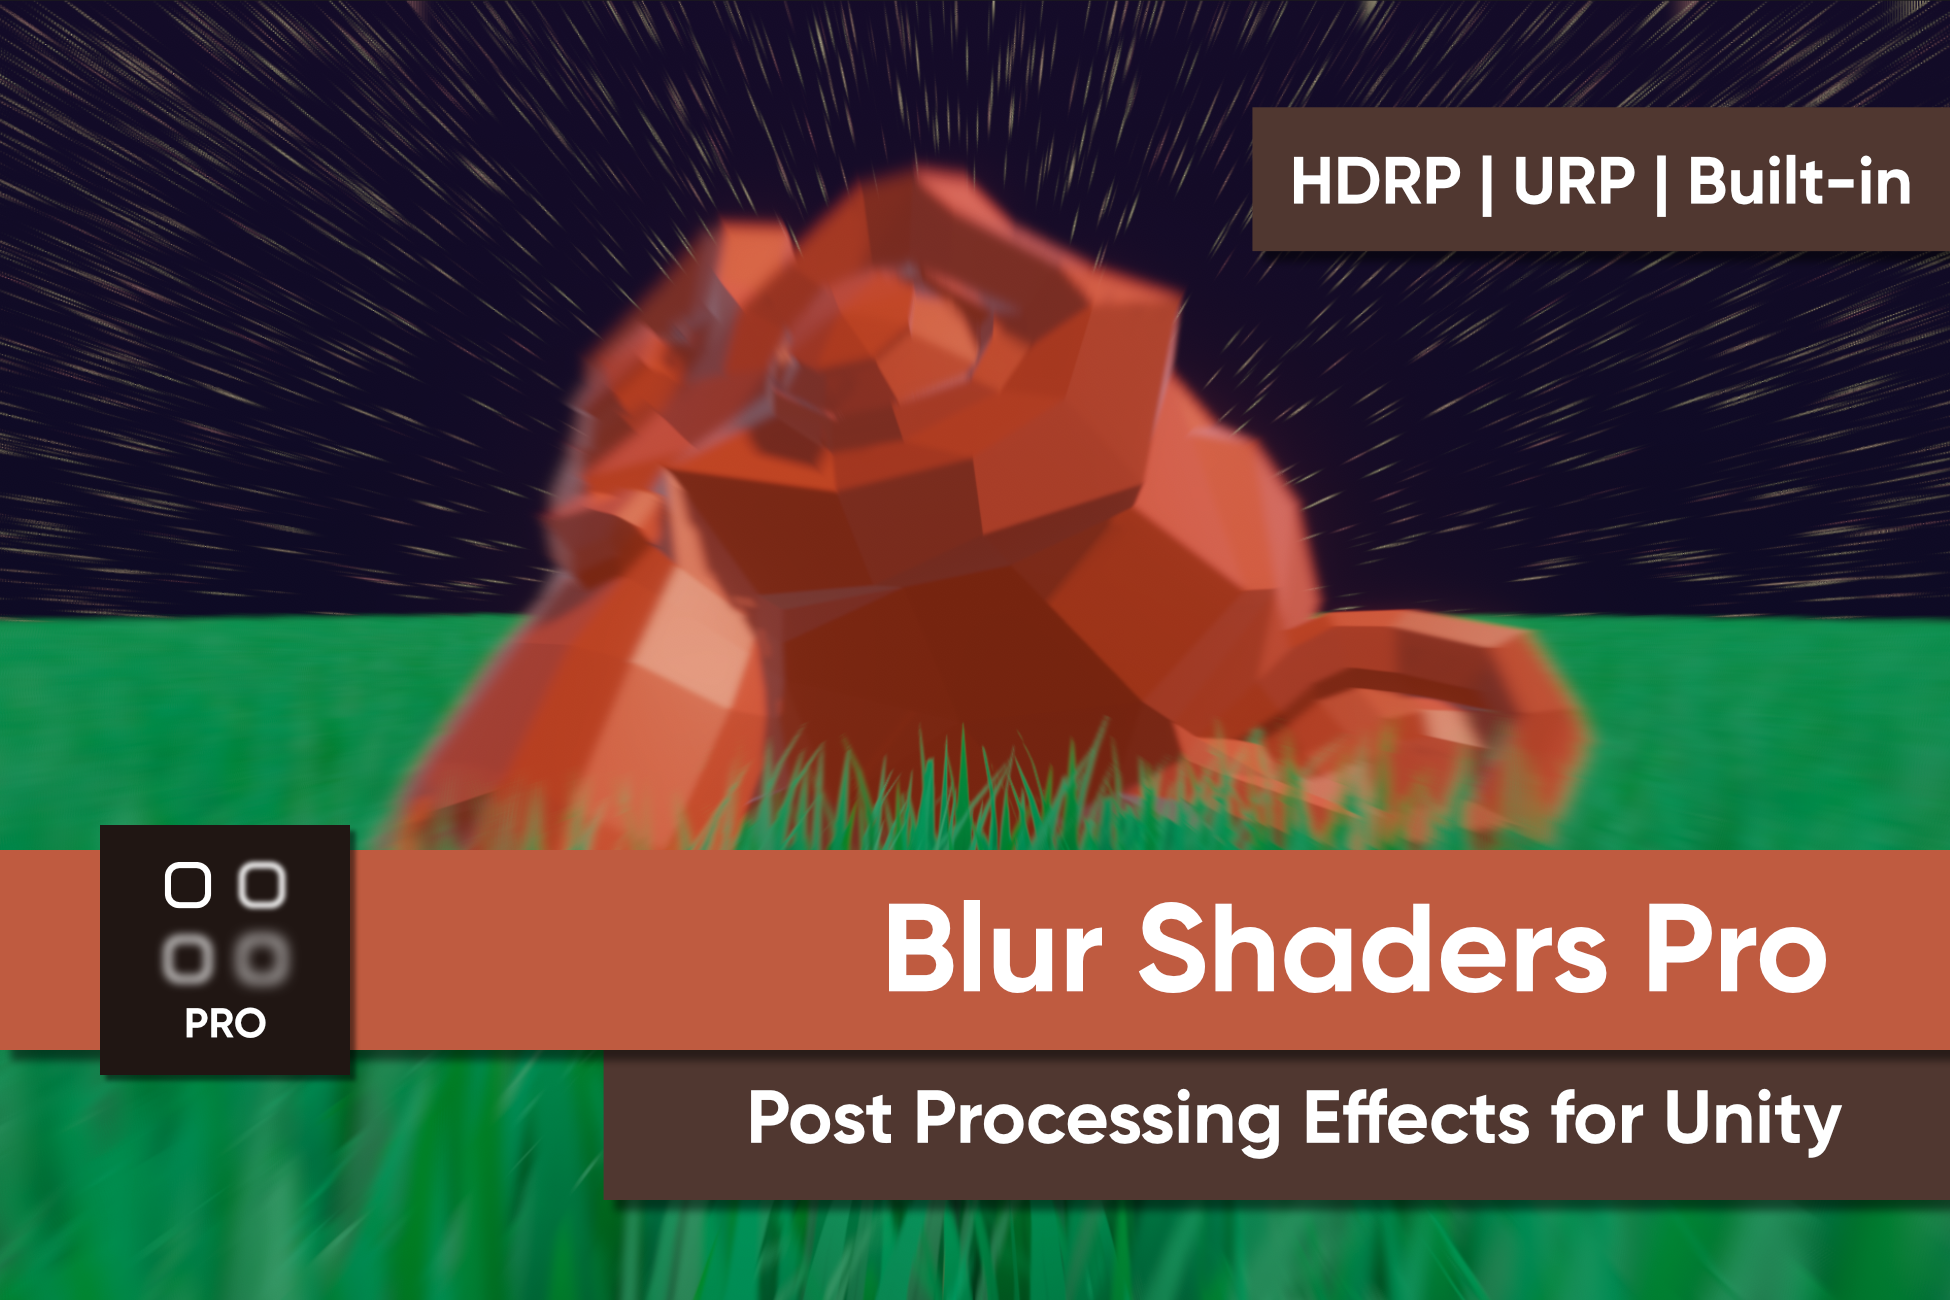 Blur Shaders Pro for Unity